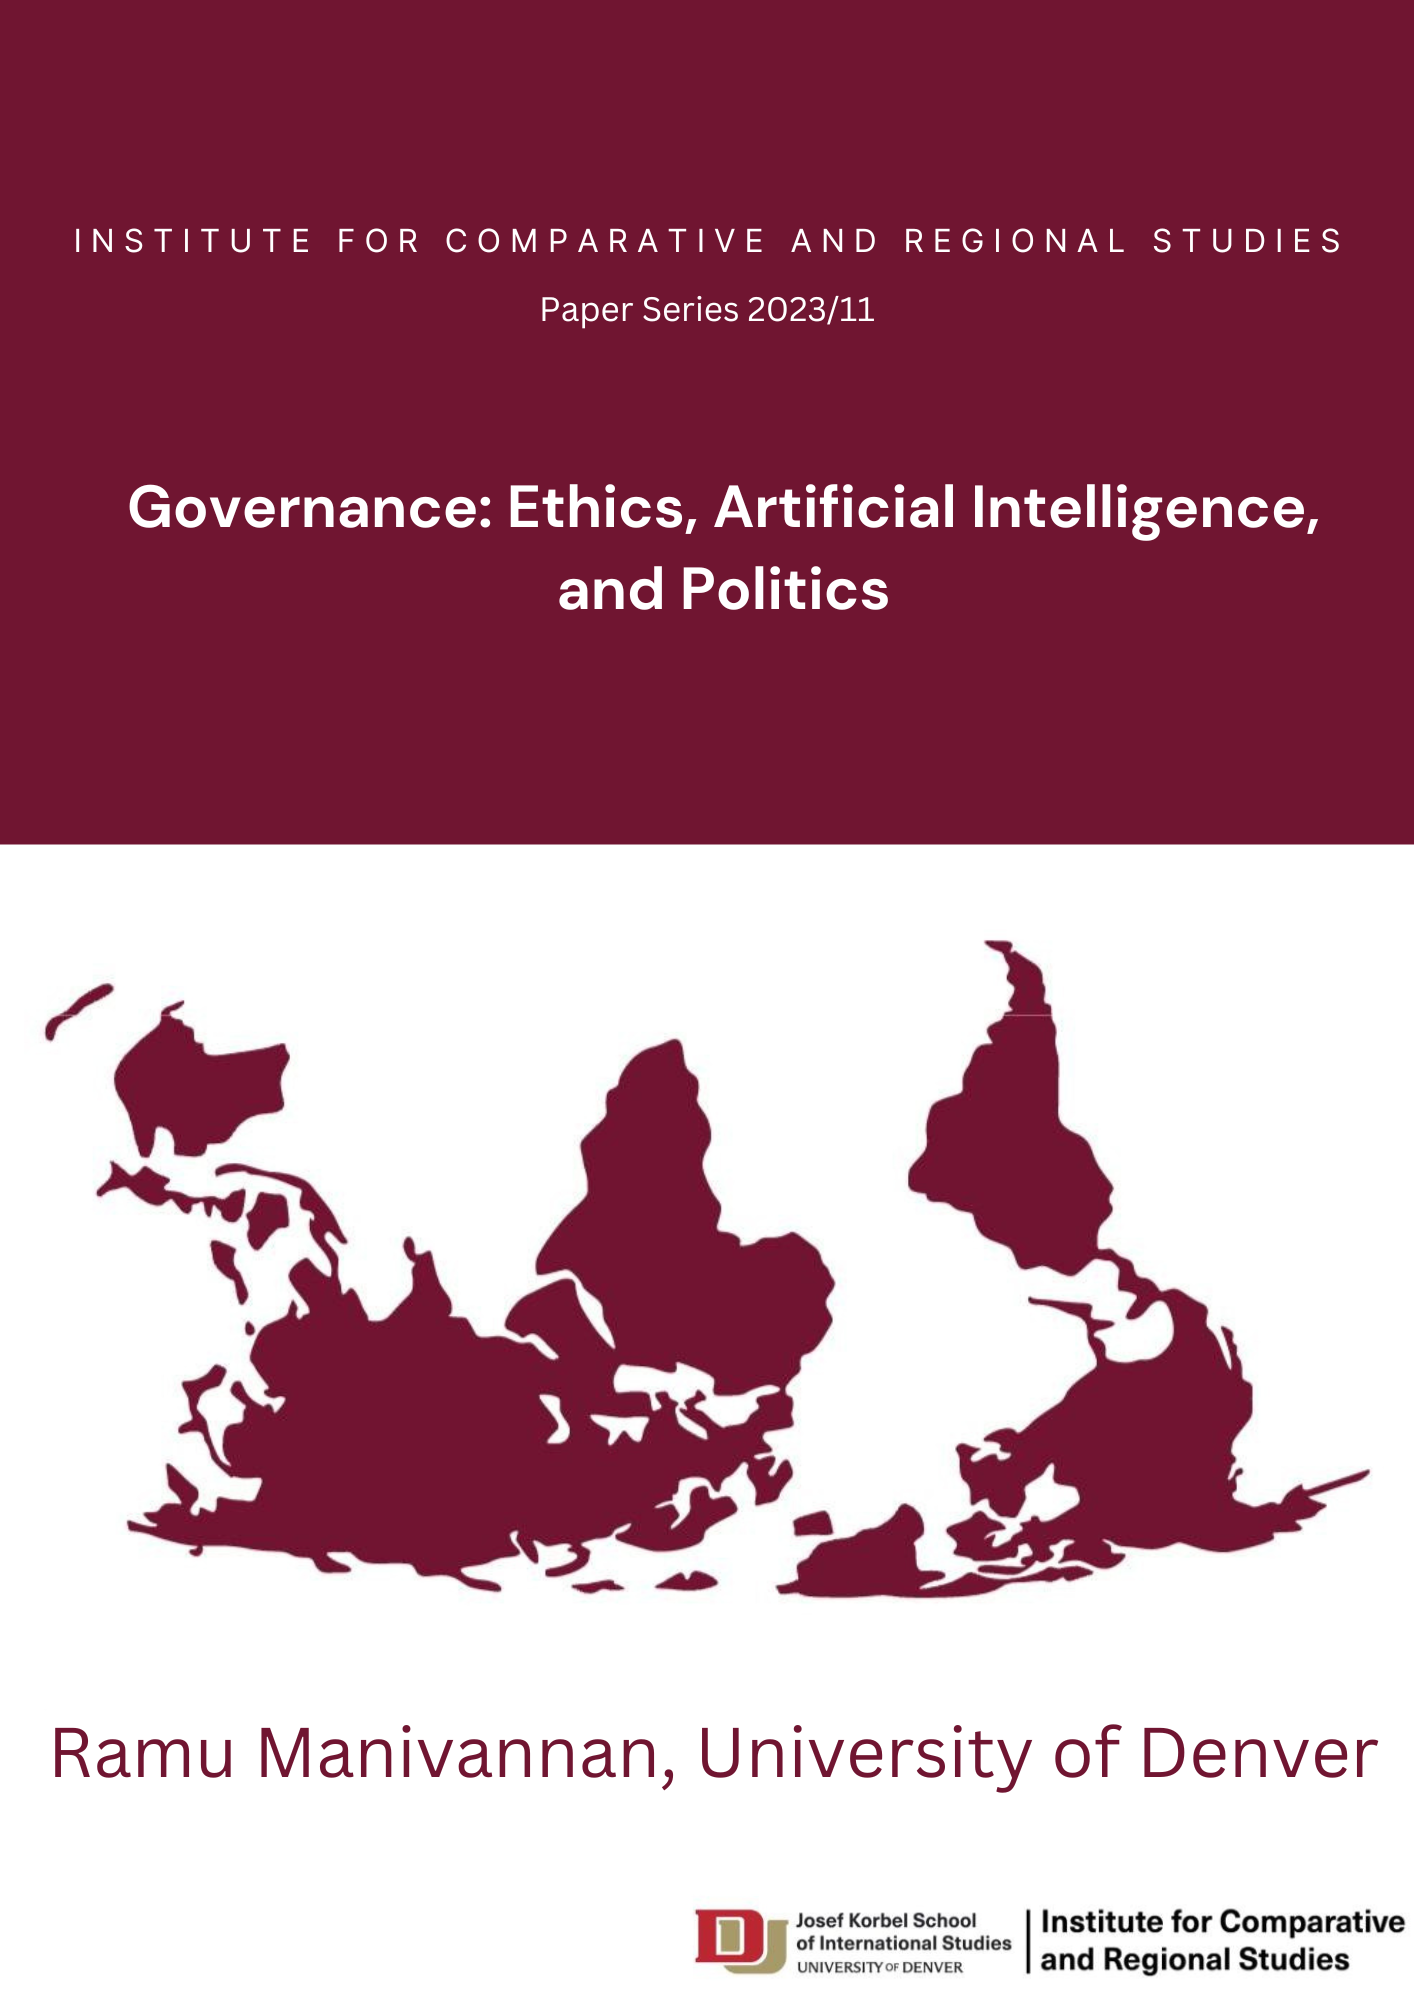 Governance: Ethics, Artificial Intelligence, and Politics